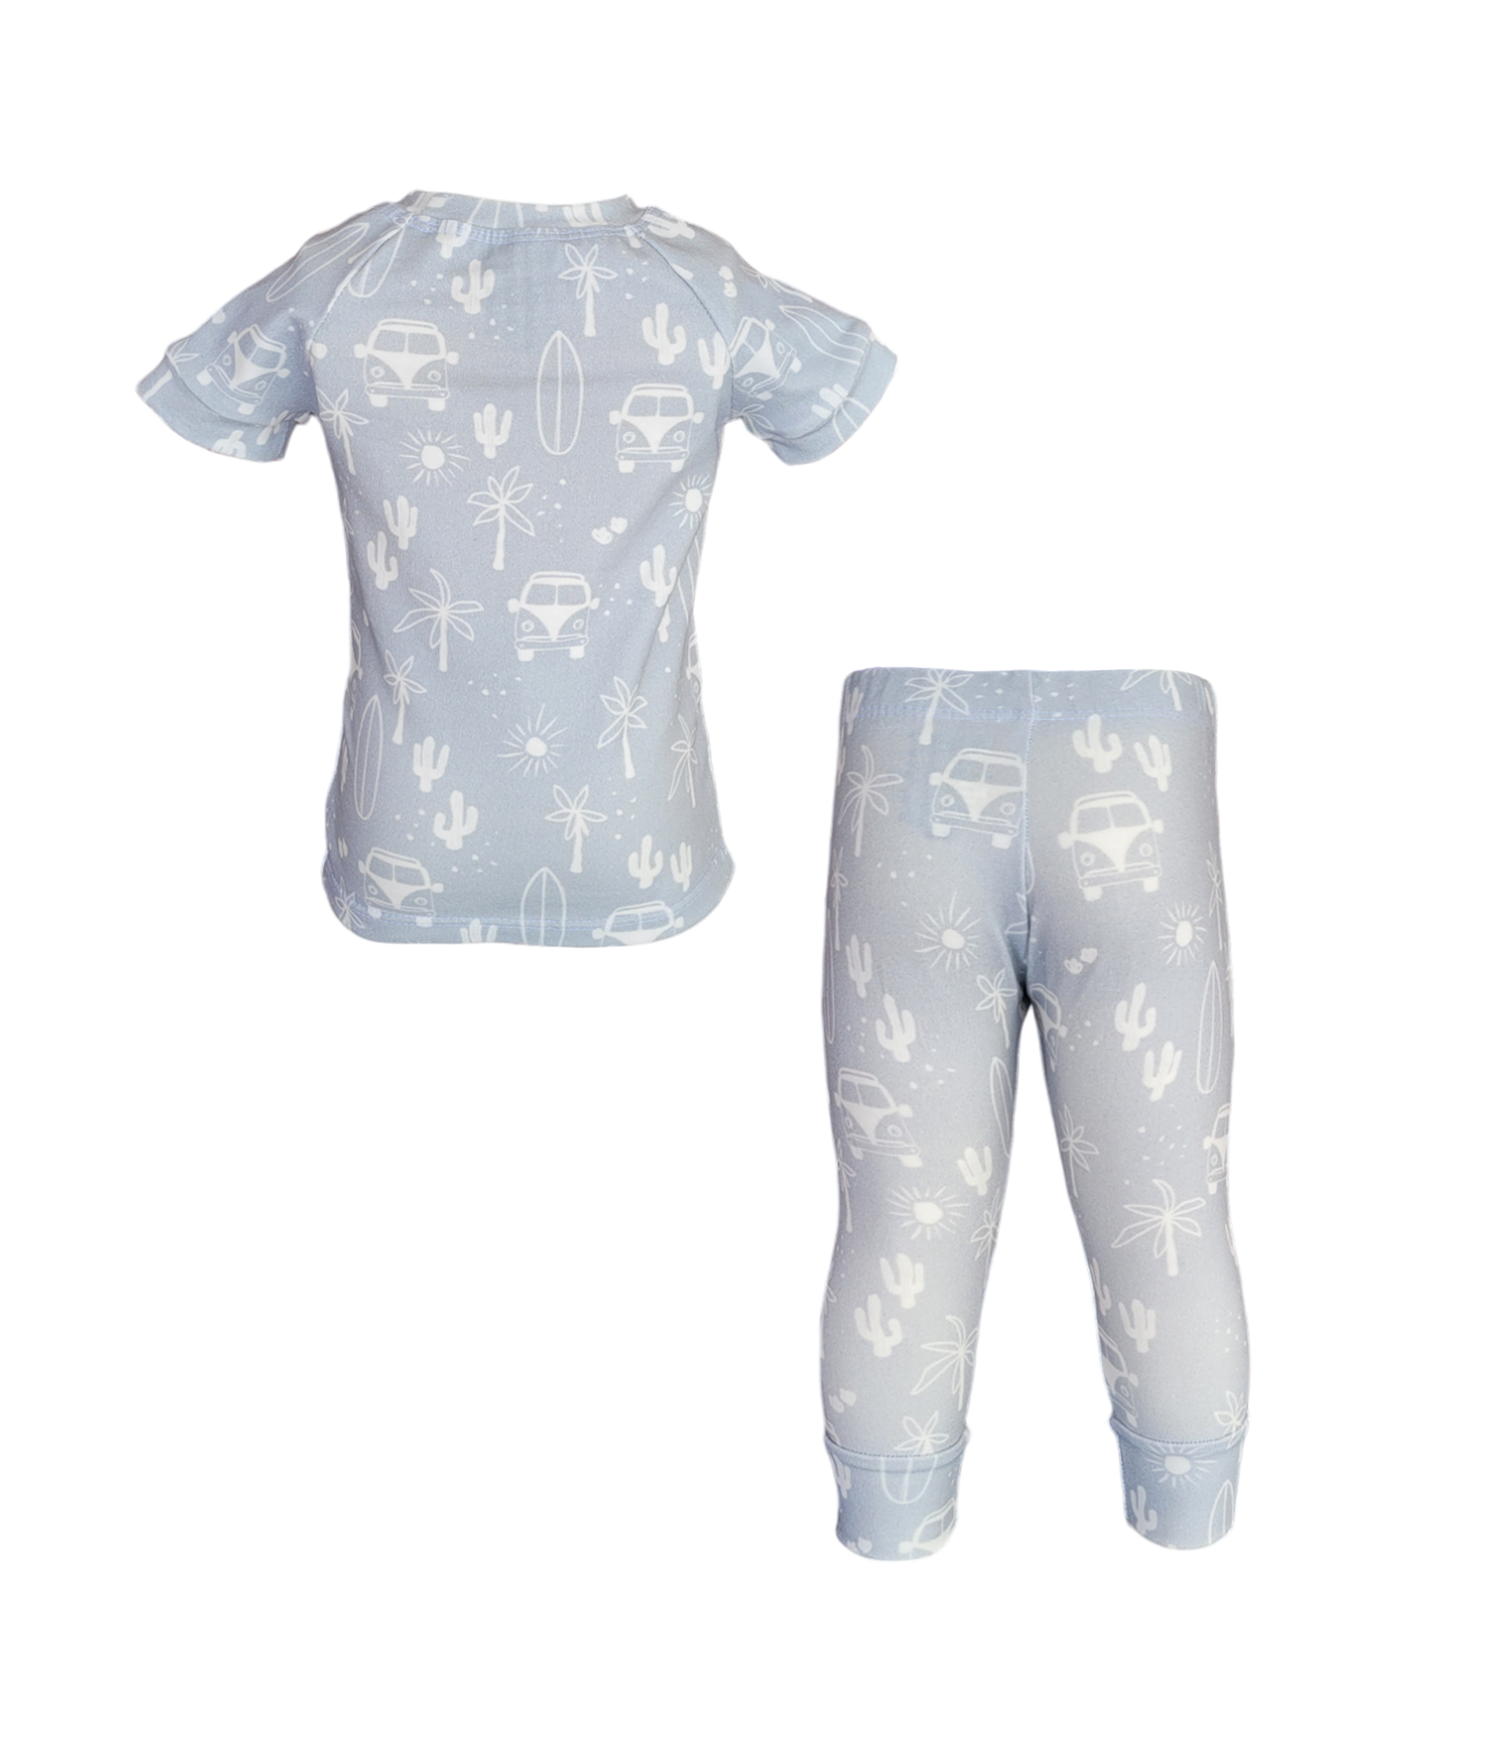 Back of VW Van Pajama Set. Organic light blue short sleeve and pant set with white surfboards, vans and cacti